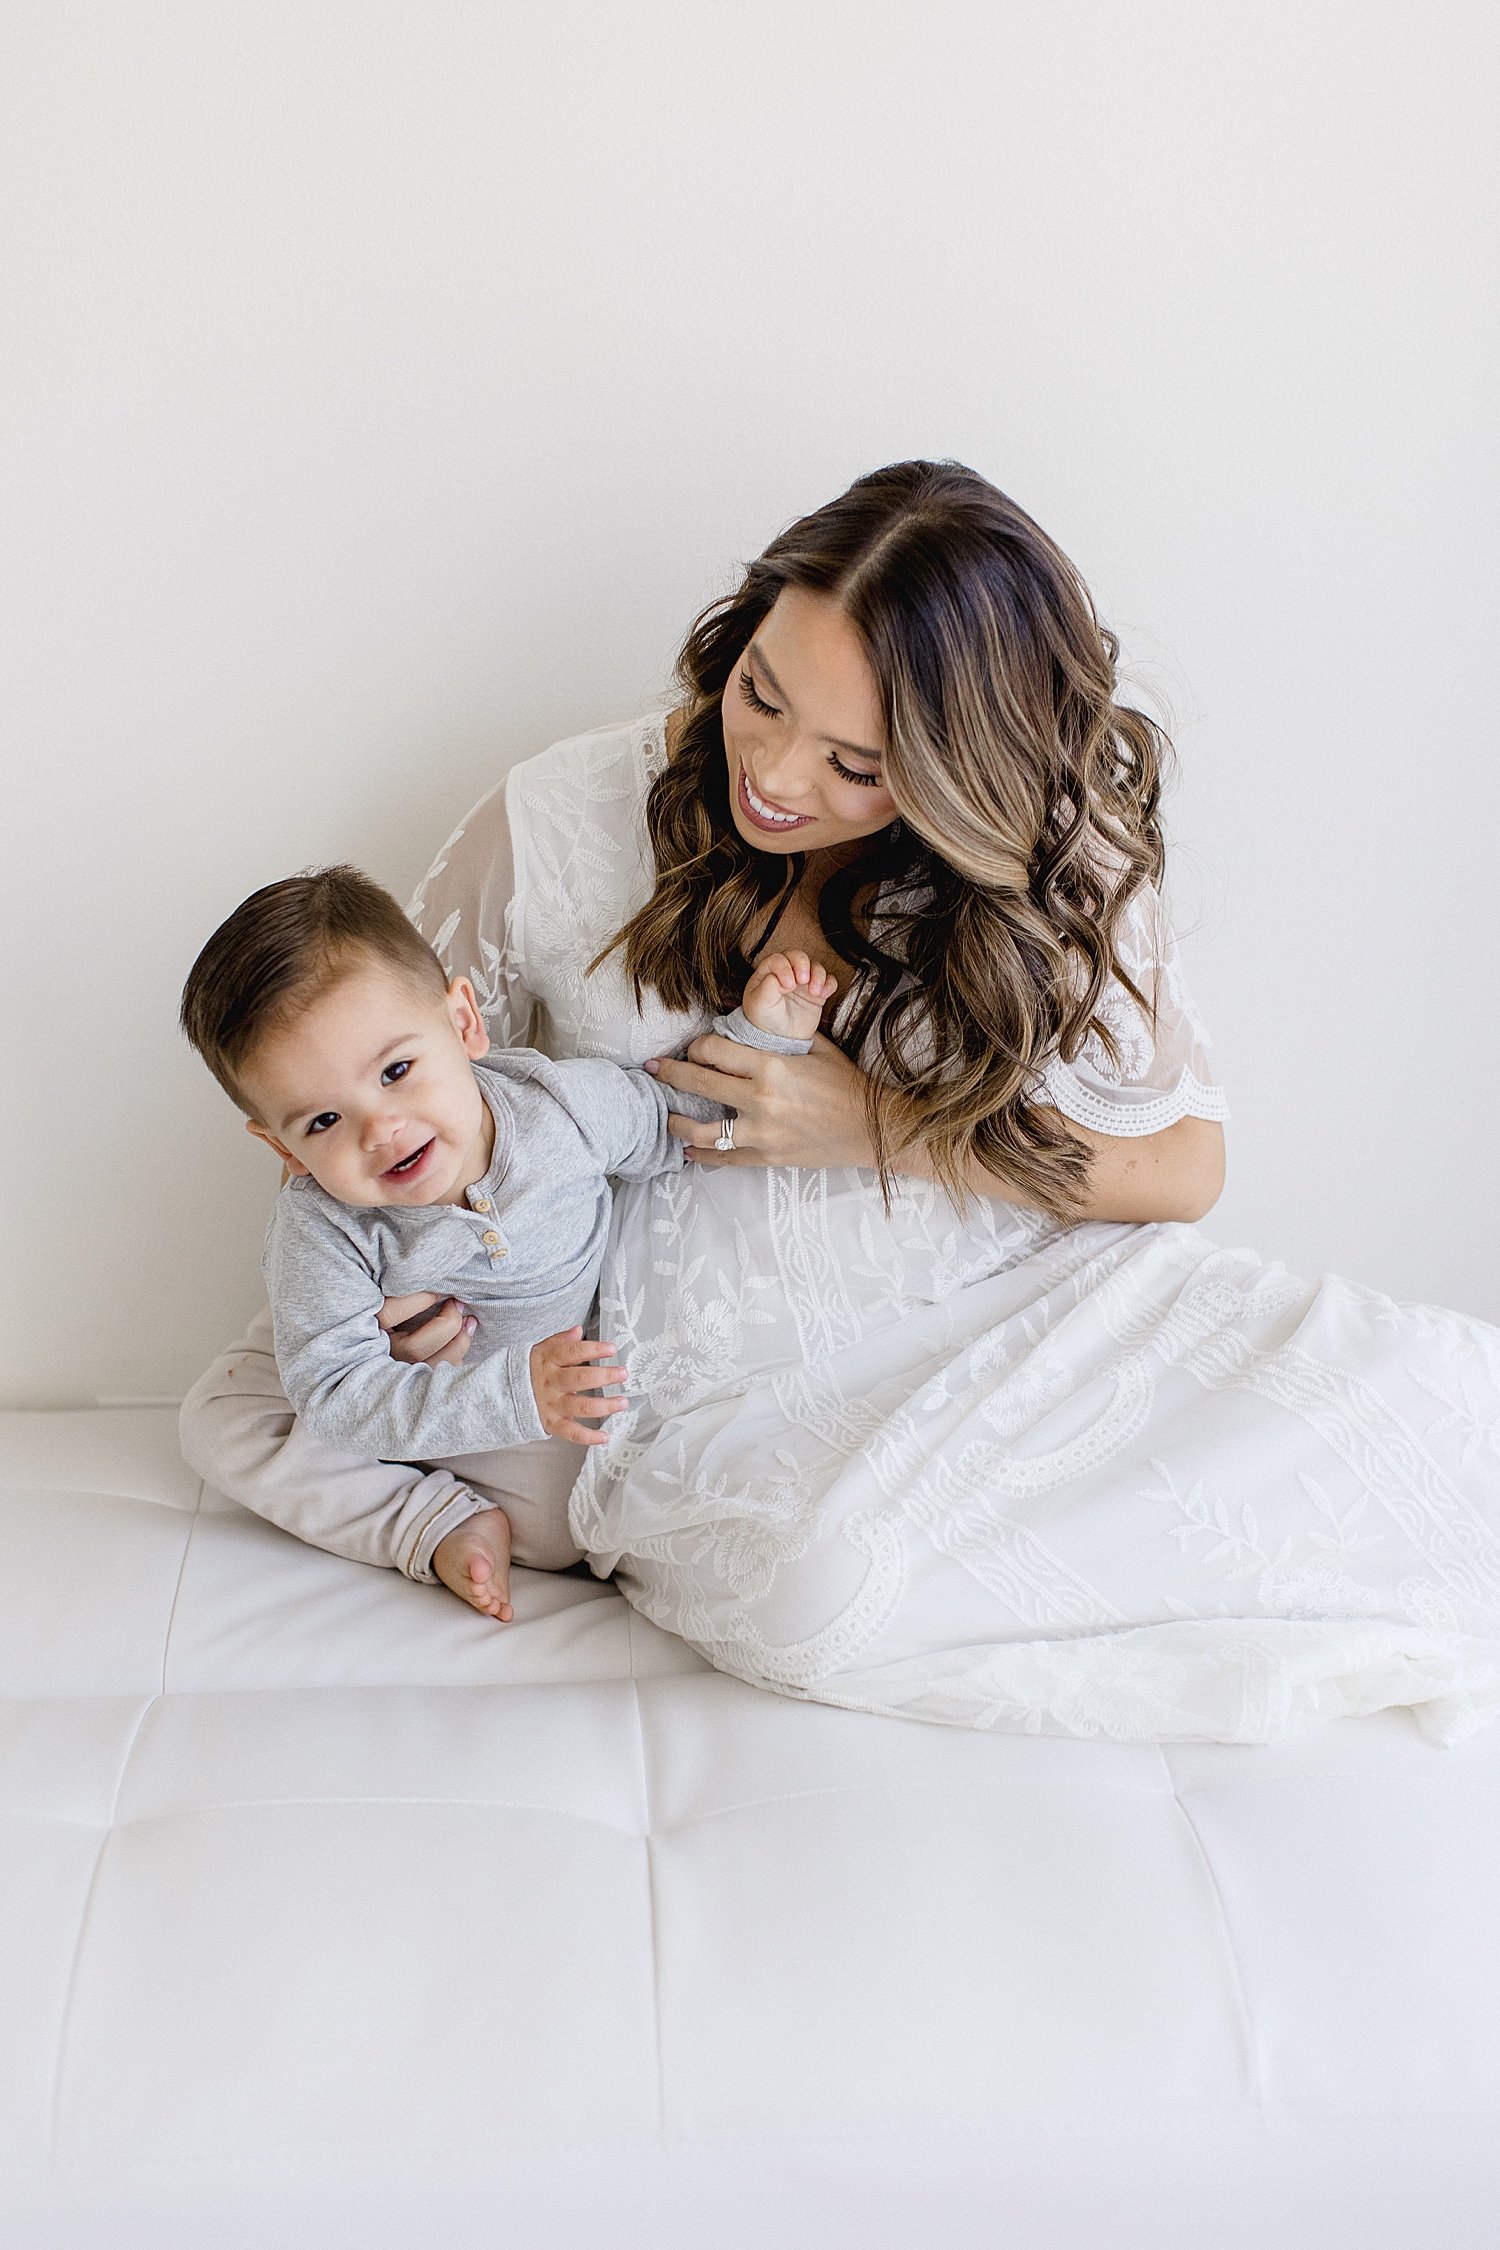 Mom and son | Ambre Williams Photograhy.